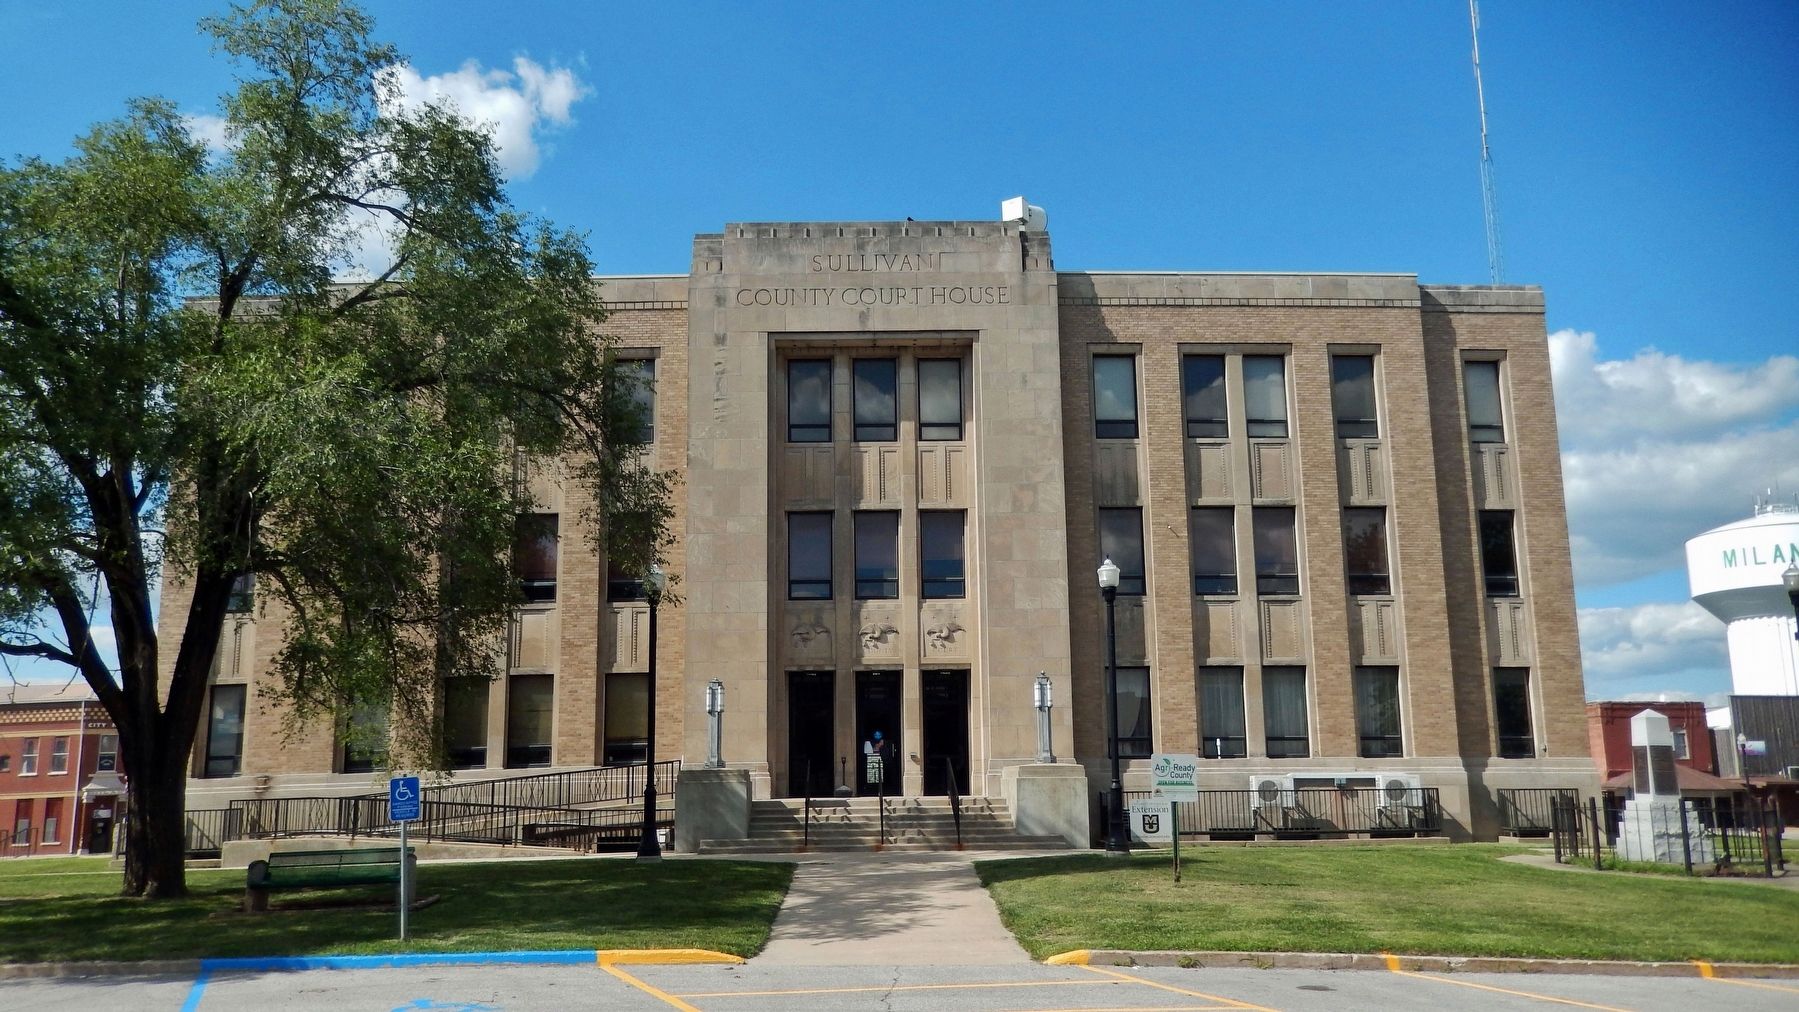 Sullivan County Courthouse (<i>south/front elevation</i>) image. Click for full size.